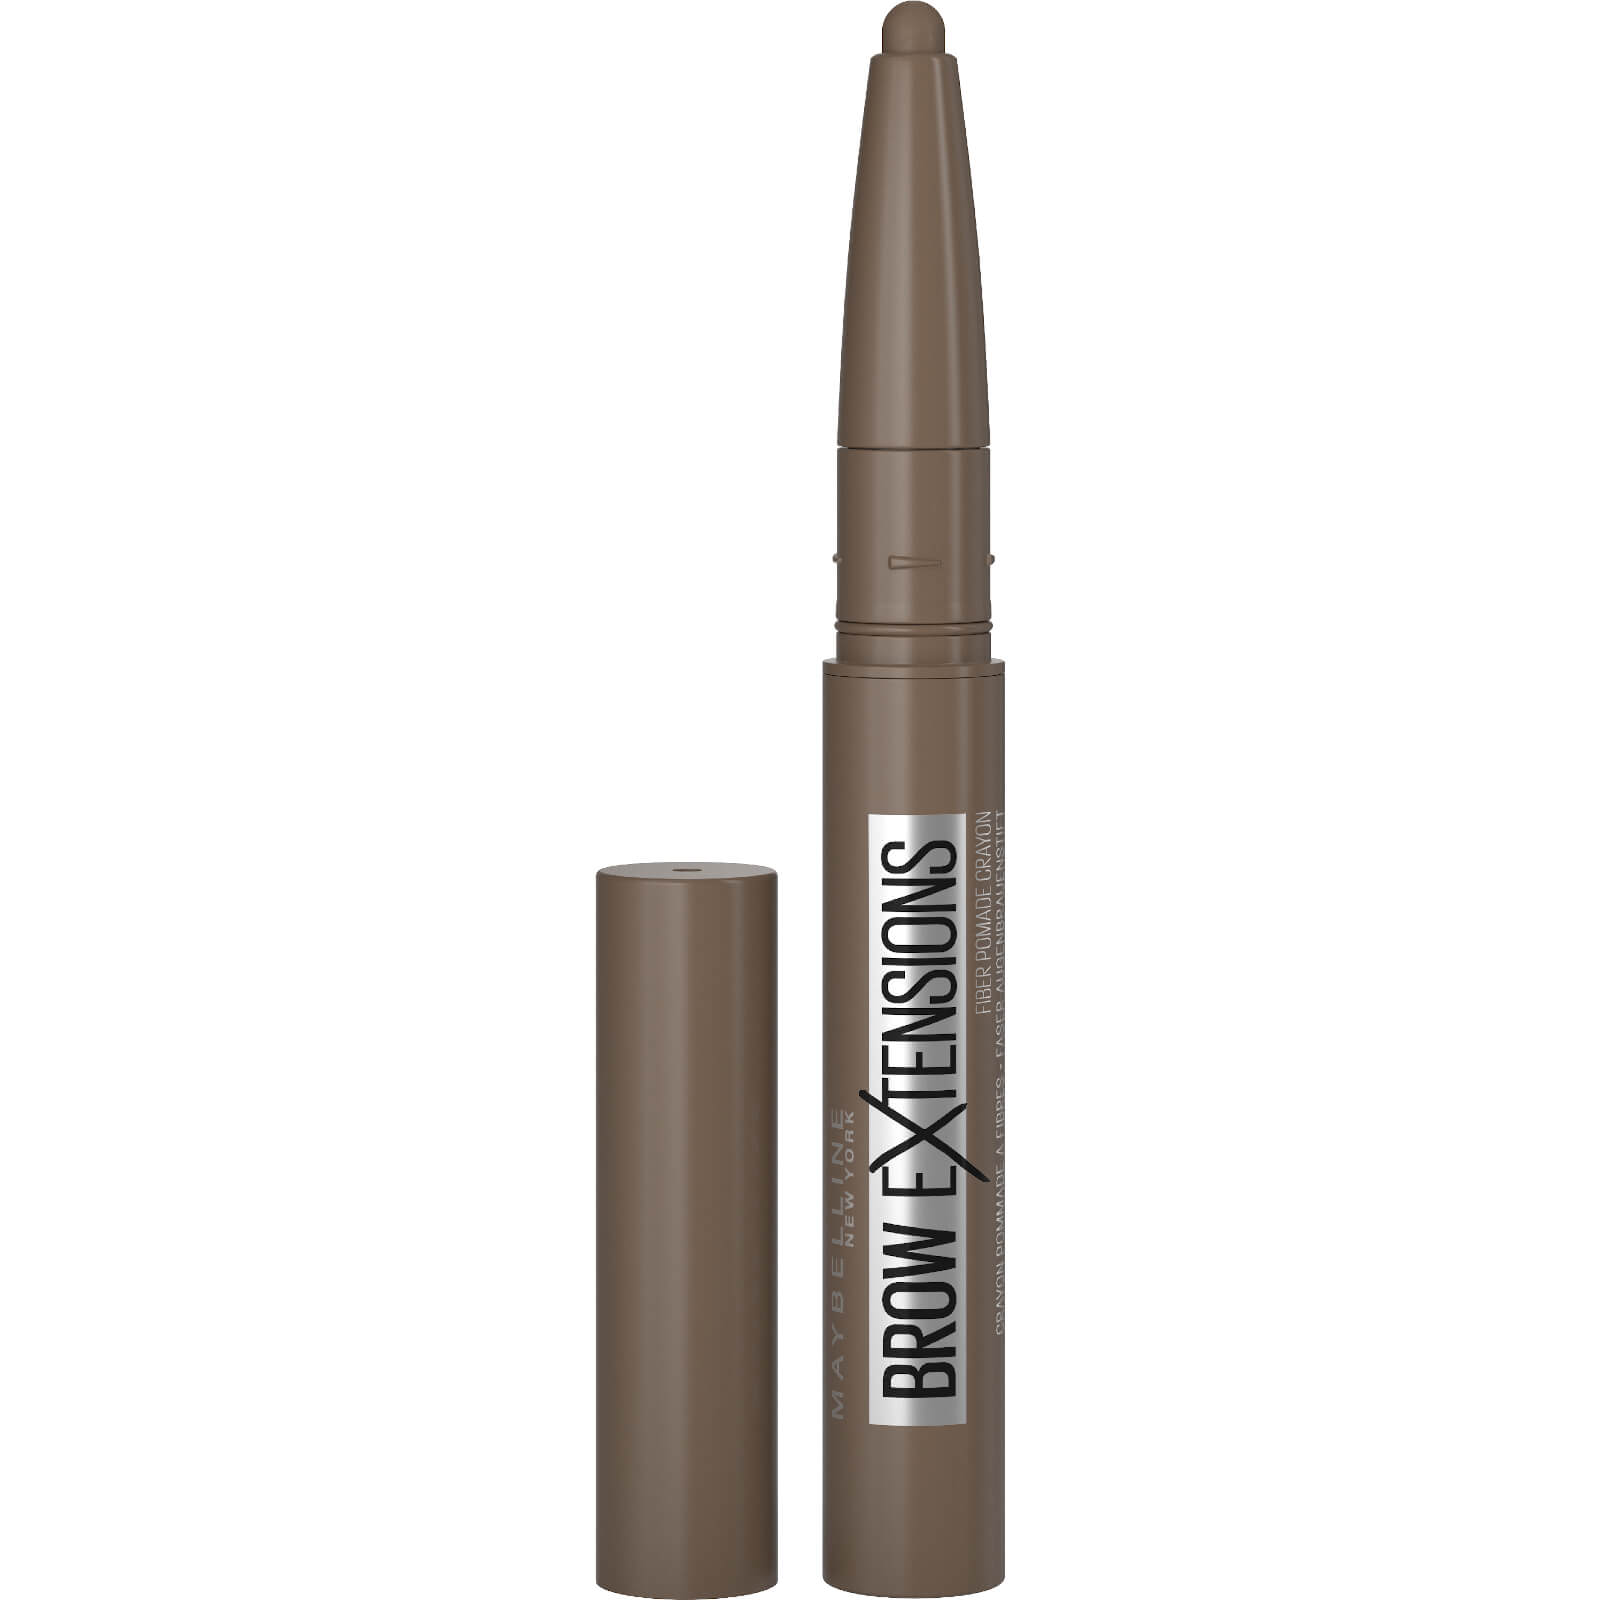 Maybelline Brow Extensions Defining Eyebrow Makeup for Thicker Natural Eyebrows 20g (Various Shades) - 04 Medium Brown